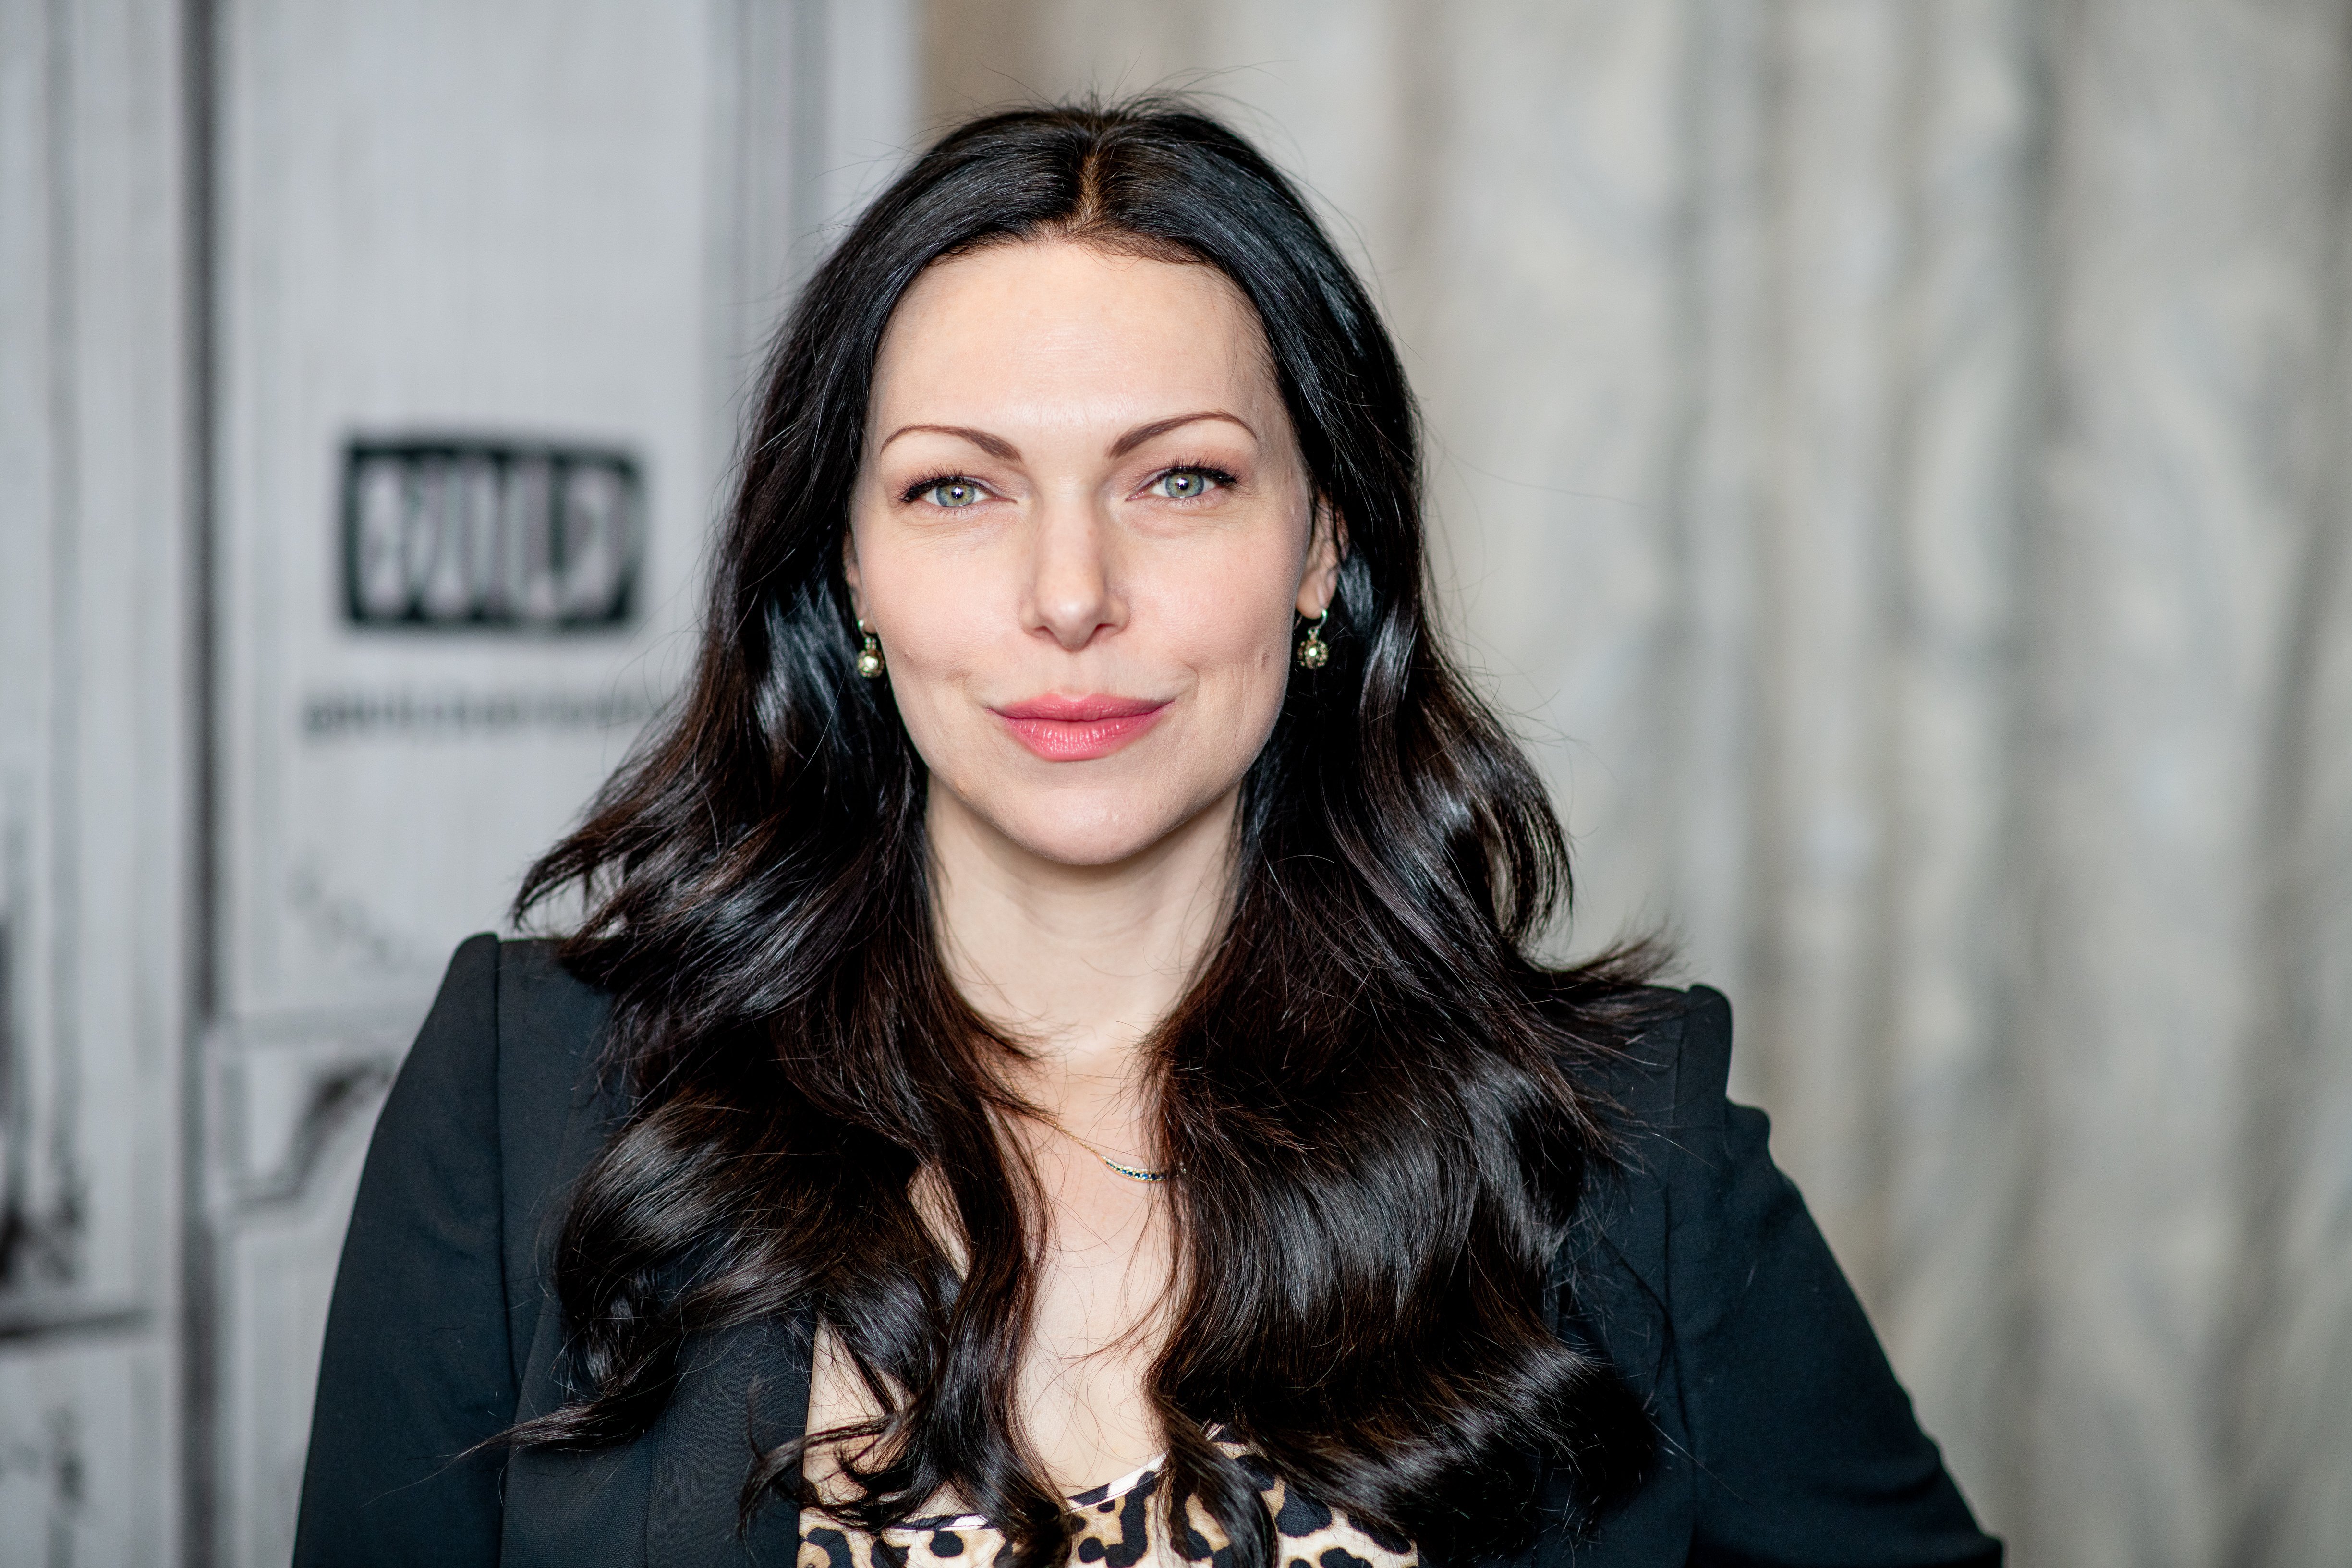 Laura Prepon discusses "Orange is the New Black" and her YouTube channel with the Build Series at Build Studio on November 27, 2018. | Photo: Getty Images